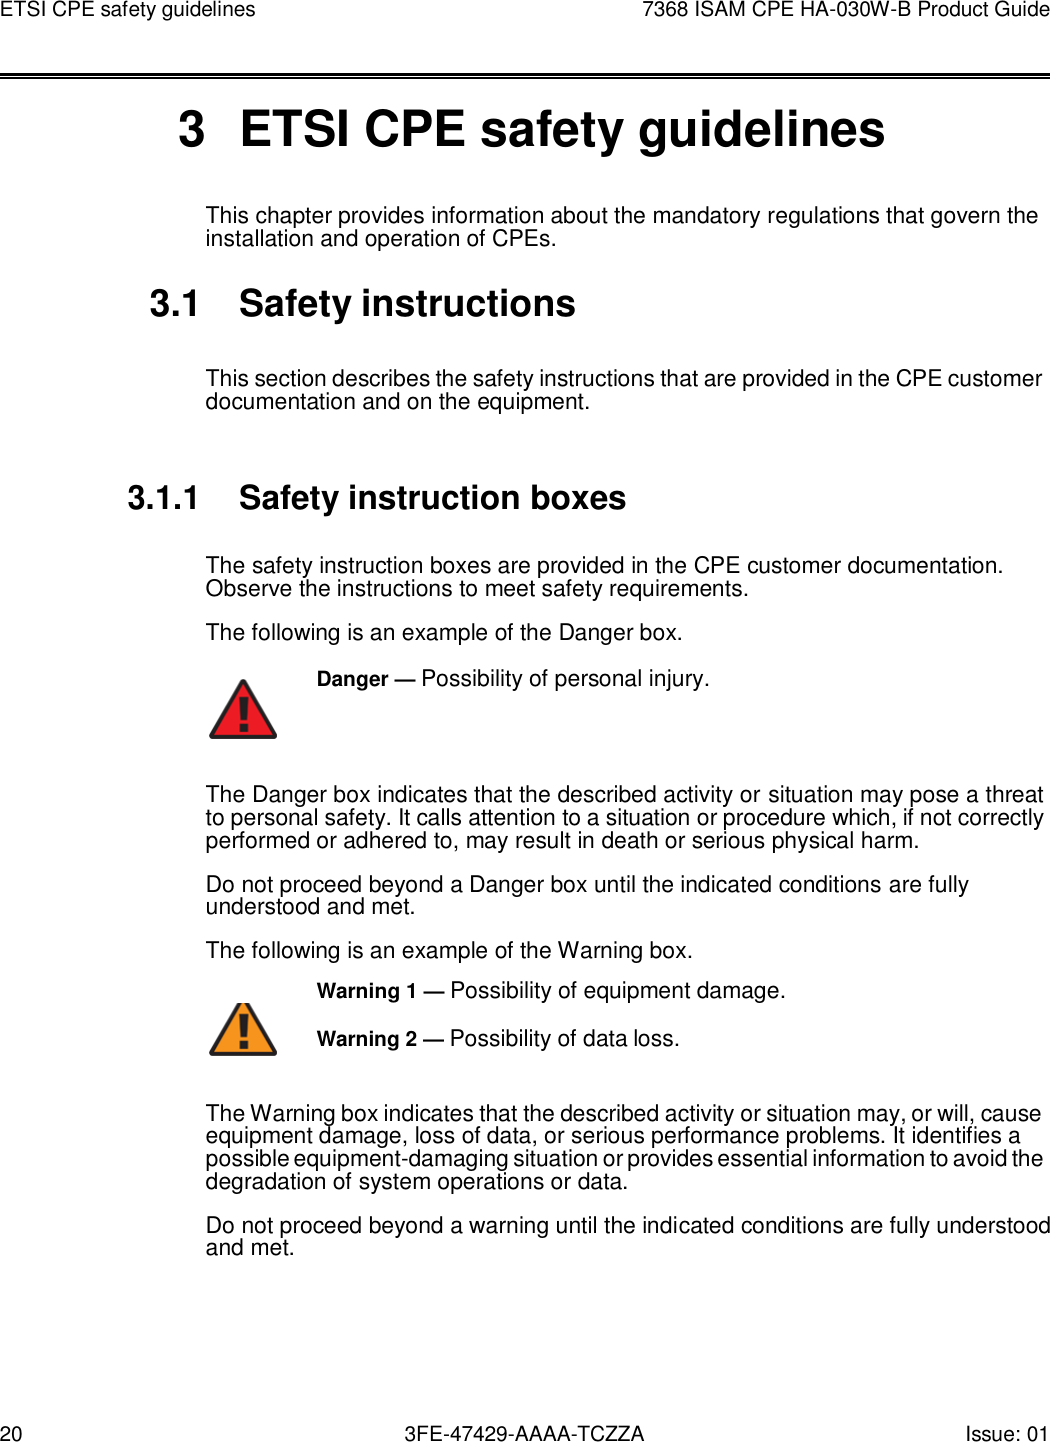 20 3FE-47429-AAAA-TCZZA Issue: 01 ETSI CPE safety guidelines 7368 ISAM CPE HA-030W-B Product Guide       3  ETSI CPE safety guidelines This chapter provides information about the mandatory regulations that govern the installation and operation of CPEs.  3.1  Safety instructions  This section describes the safety instructions that are provided in the CPE customer documentation and on the equipment.   3.1.1 Safety instruction boxes  The safety instruction boxes are provided in the CPE customer documentation. Observe the instructions to meet safety requirements. The following is an example of the Danger box. Danger — Possibility of personal injury.    The Danger box indicates that the described activity or situation may pose a threat to personal safety. It calls attention to a situation or procedure which, if not correctly performed or adhered to, may result in death or serious physical harm. Do not proceed beyond a Danger box until the indicated conditions are fully understood and met. The following is an example of the Warning box. Warning 1 — Possibility of equipment damage.         Warning 2 — Possibility of data loss. The Warning box indicates that the described activity or situation may, or will, cause equipment damage, loss of data, or serious performance problems. It identifies a possible equipment-damaging situation or provides essential information to avoid the degradation of system operations or data. Do not proceed beyond a warning until the indicated conditions are fully understood and met. 